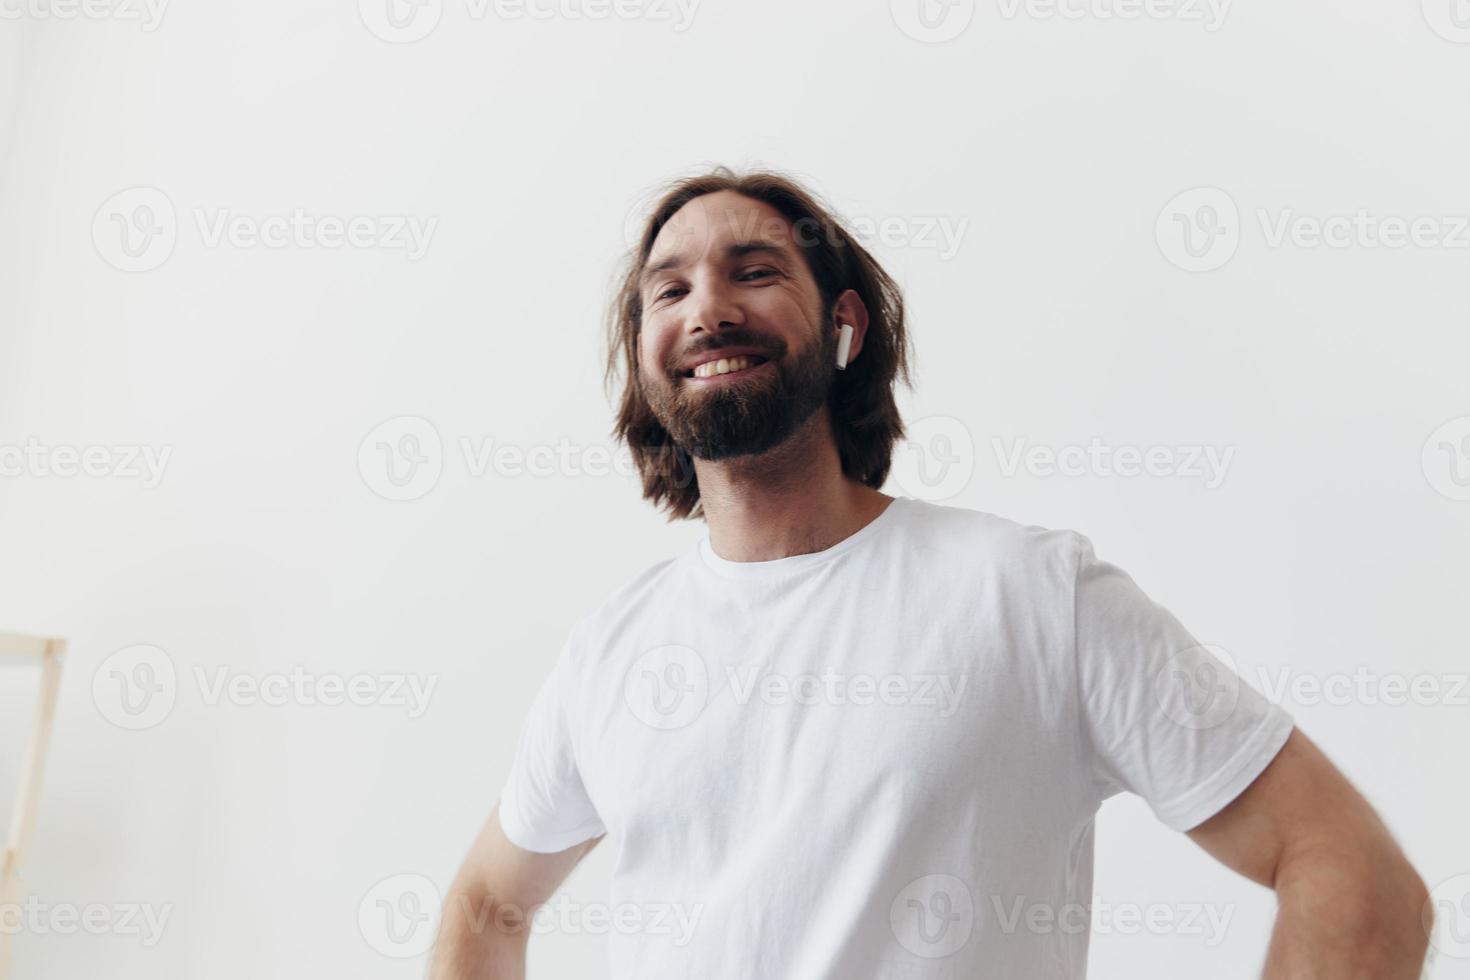 happy man listening to music and smiling in a white t-shirt on a white background happy photo